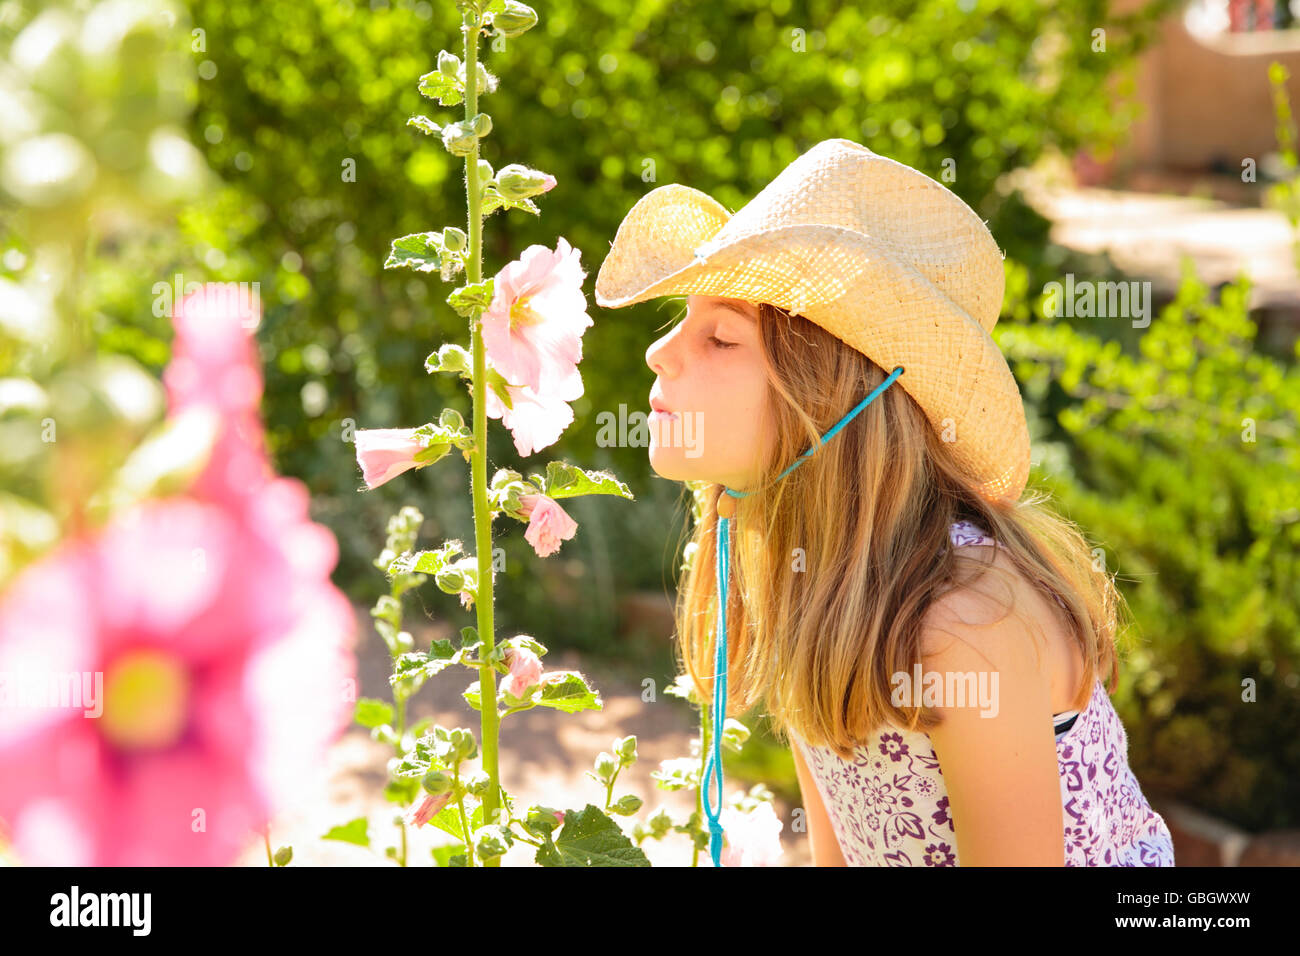 Young girl wearing cowboy hat smells a flower Stock Photo